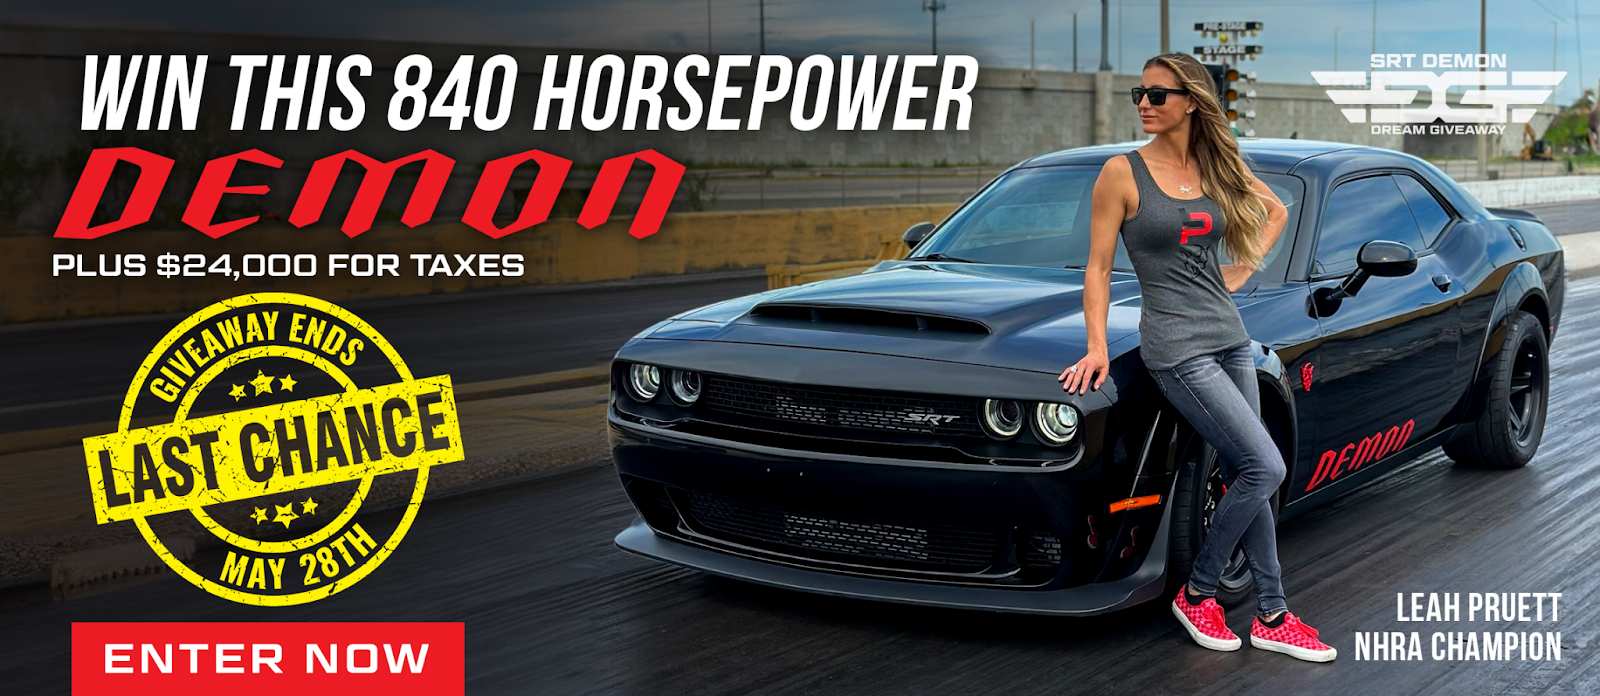 840 horsepower demon giveaway advertisement image with woman leaning on the black car